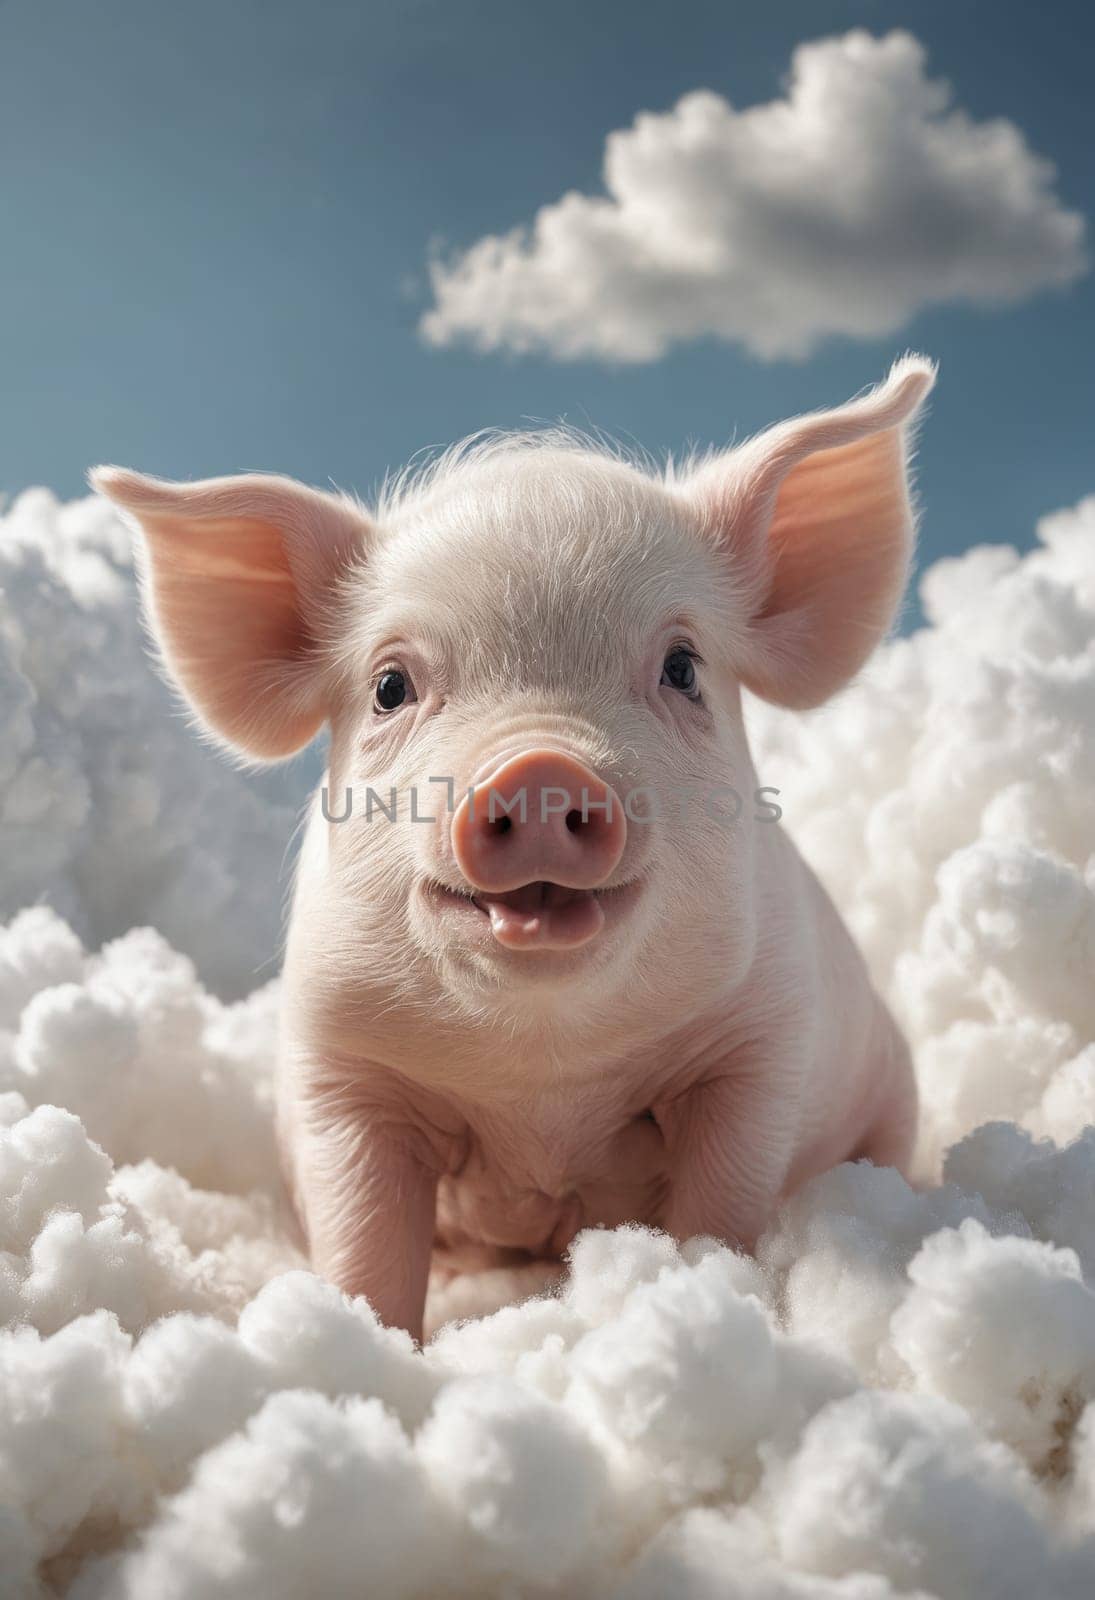 A cute piglet captured in its natural farm environment, showcasing rural life and animal husbandry.